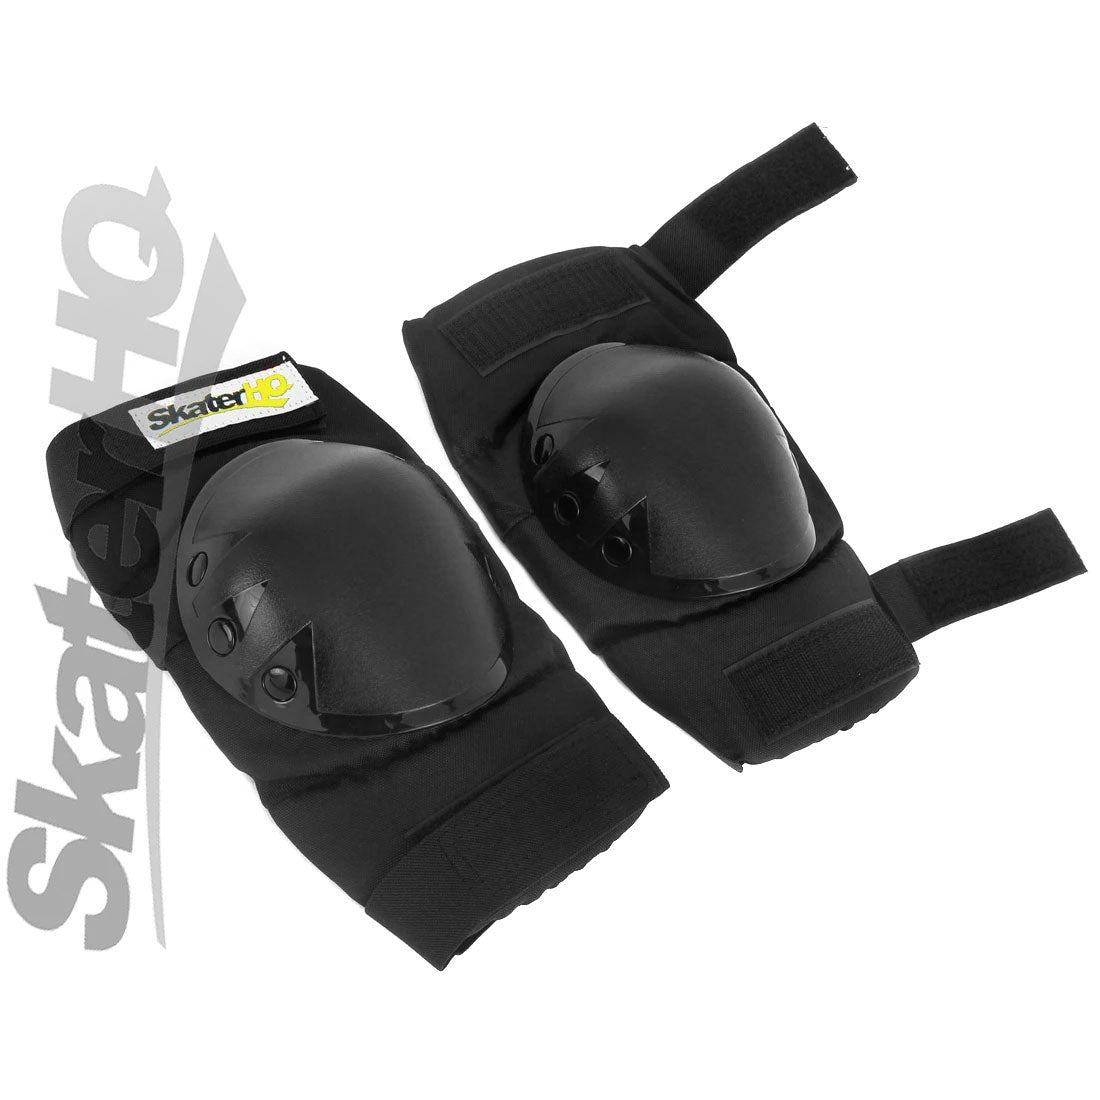 Skater HQ Knee/Elbow Set - XLarge Protective Gear